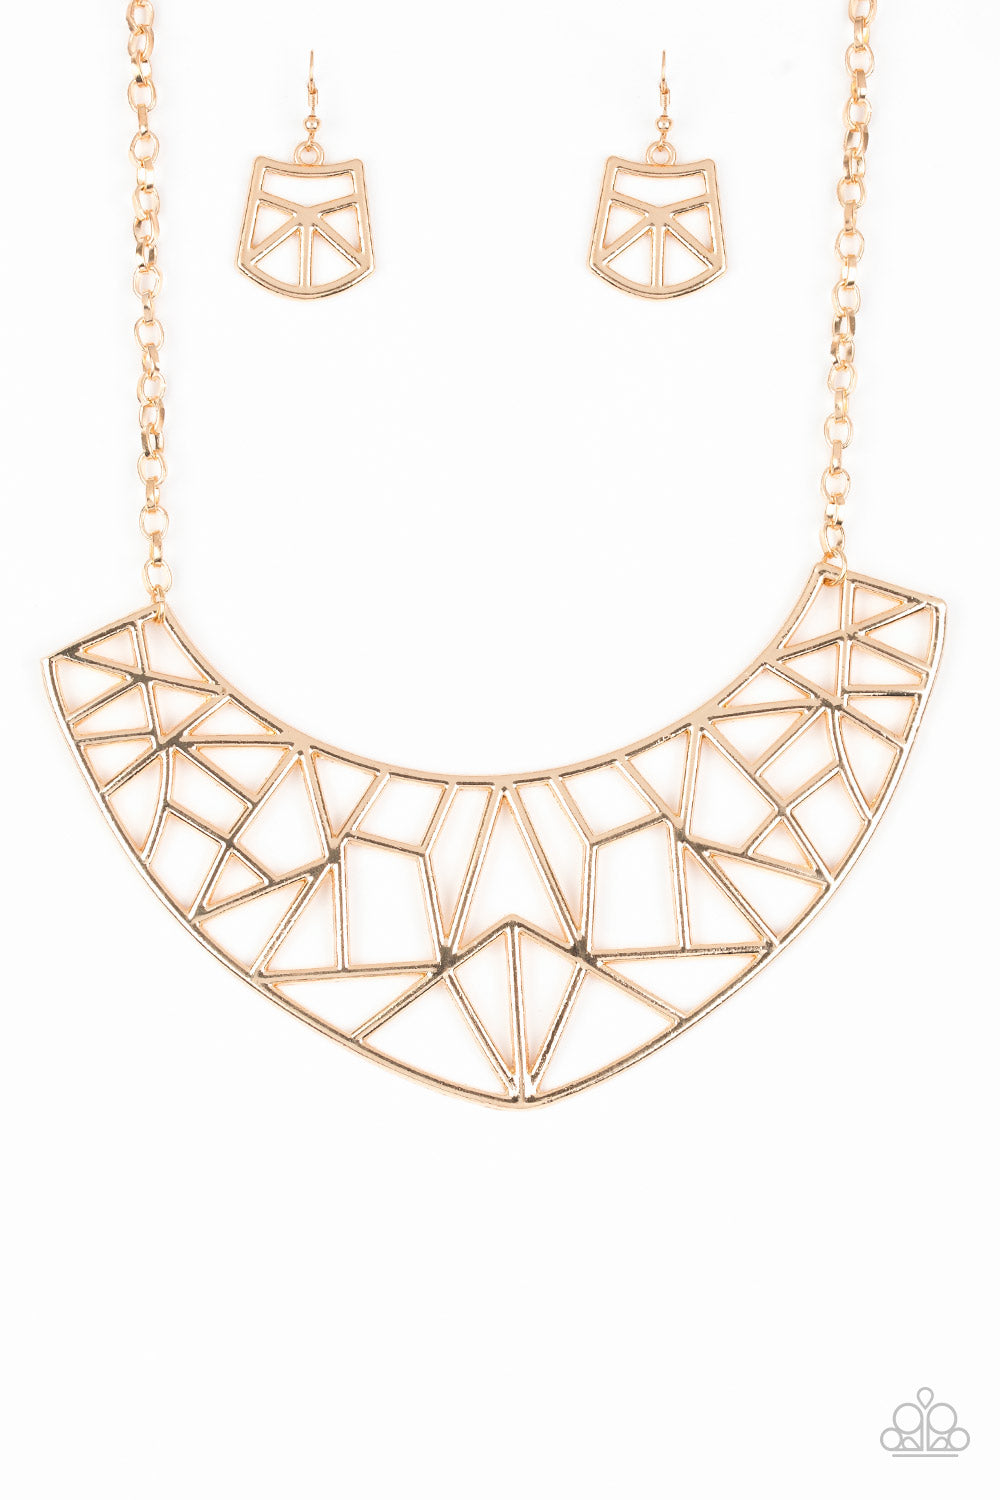 Strike While HAUTE - Gold necklace